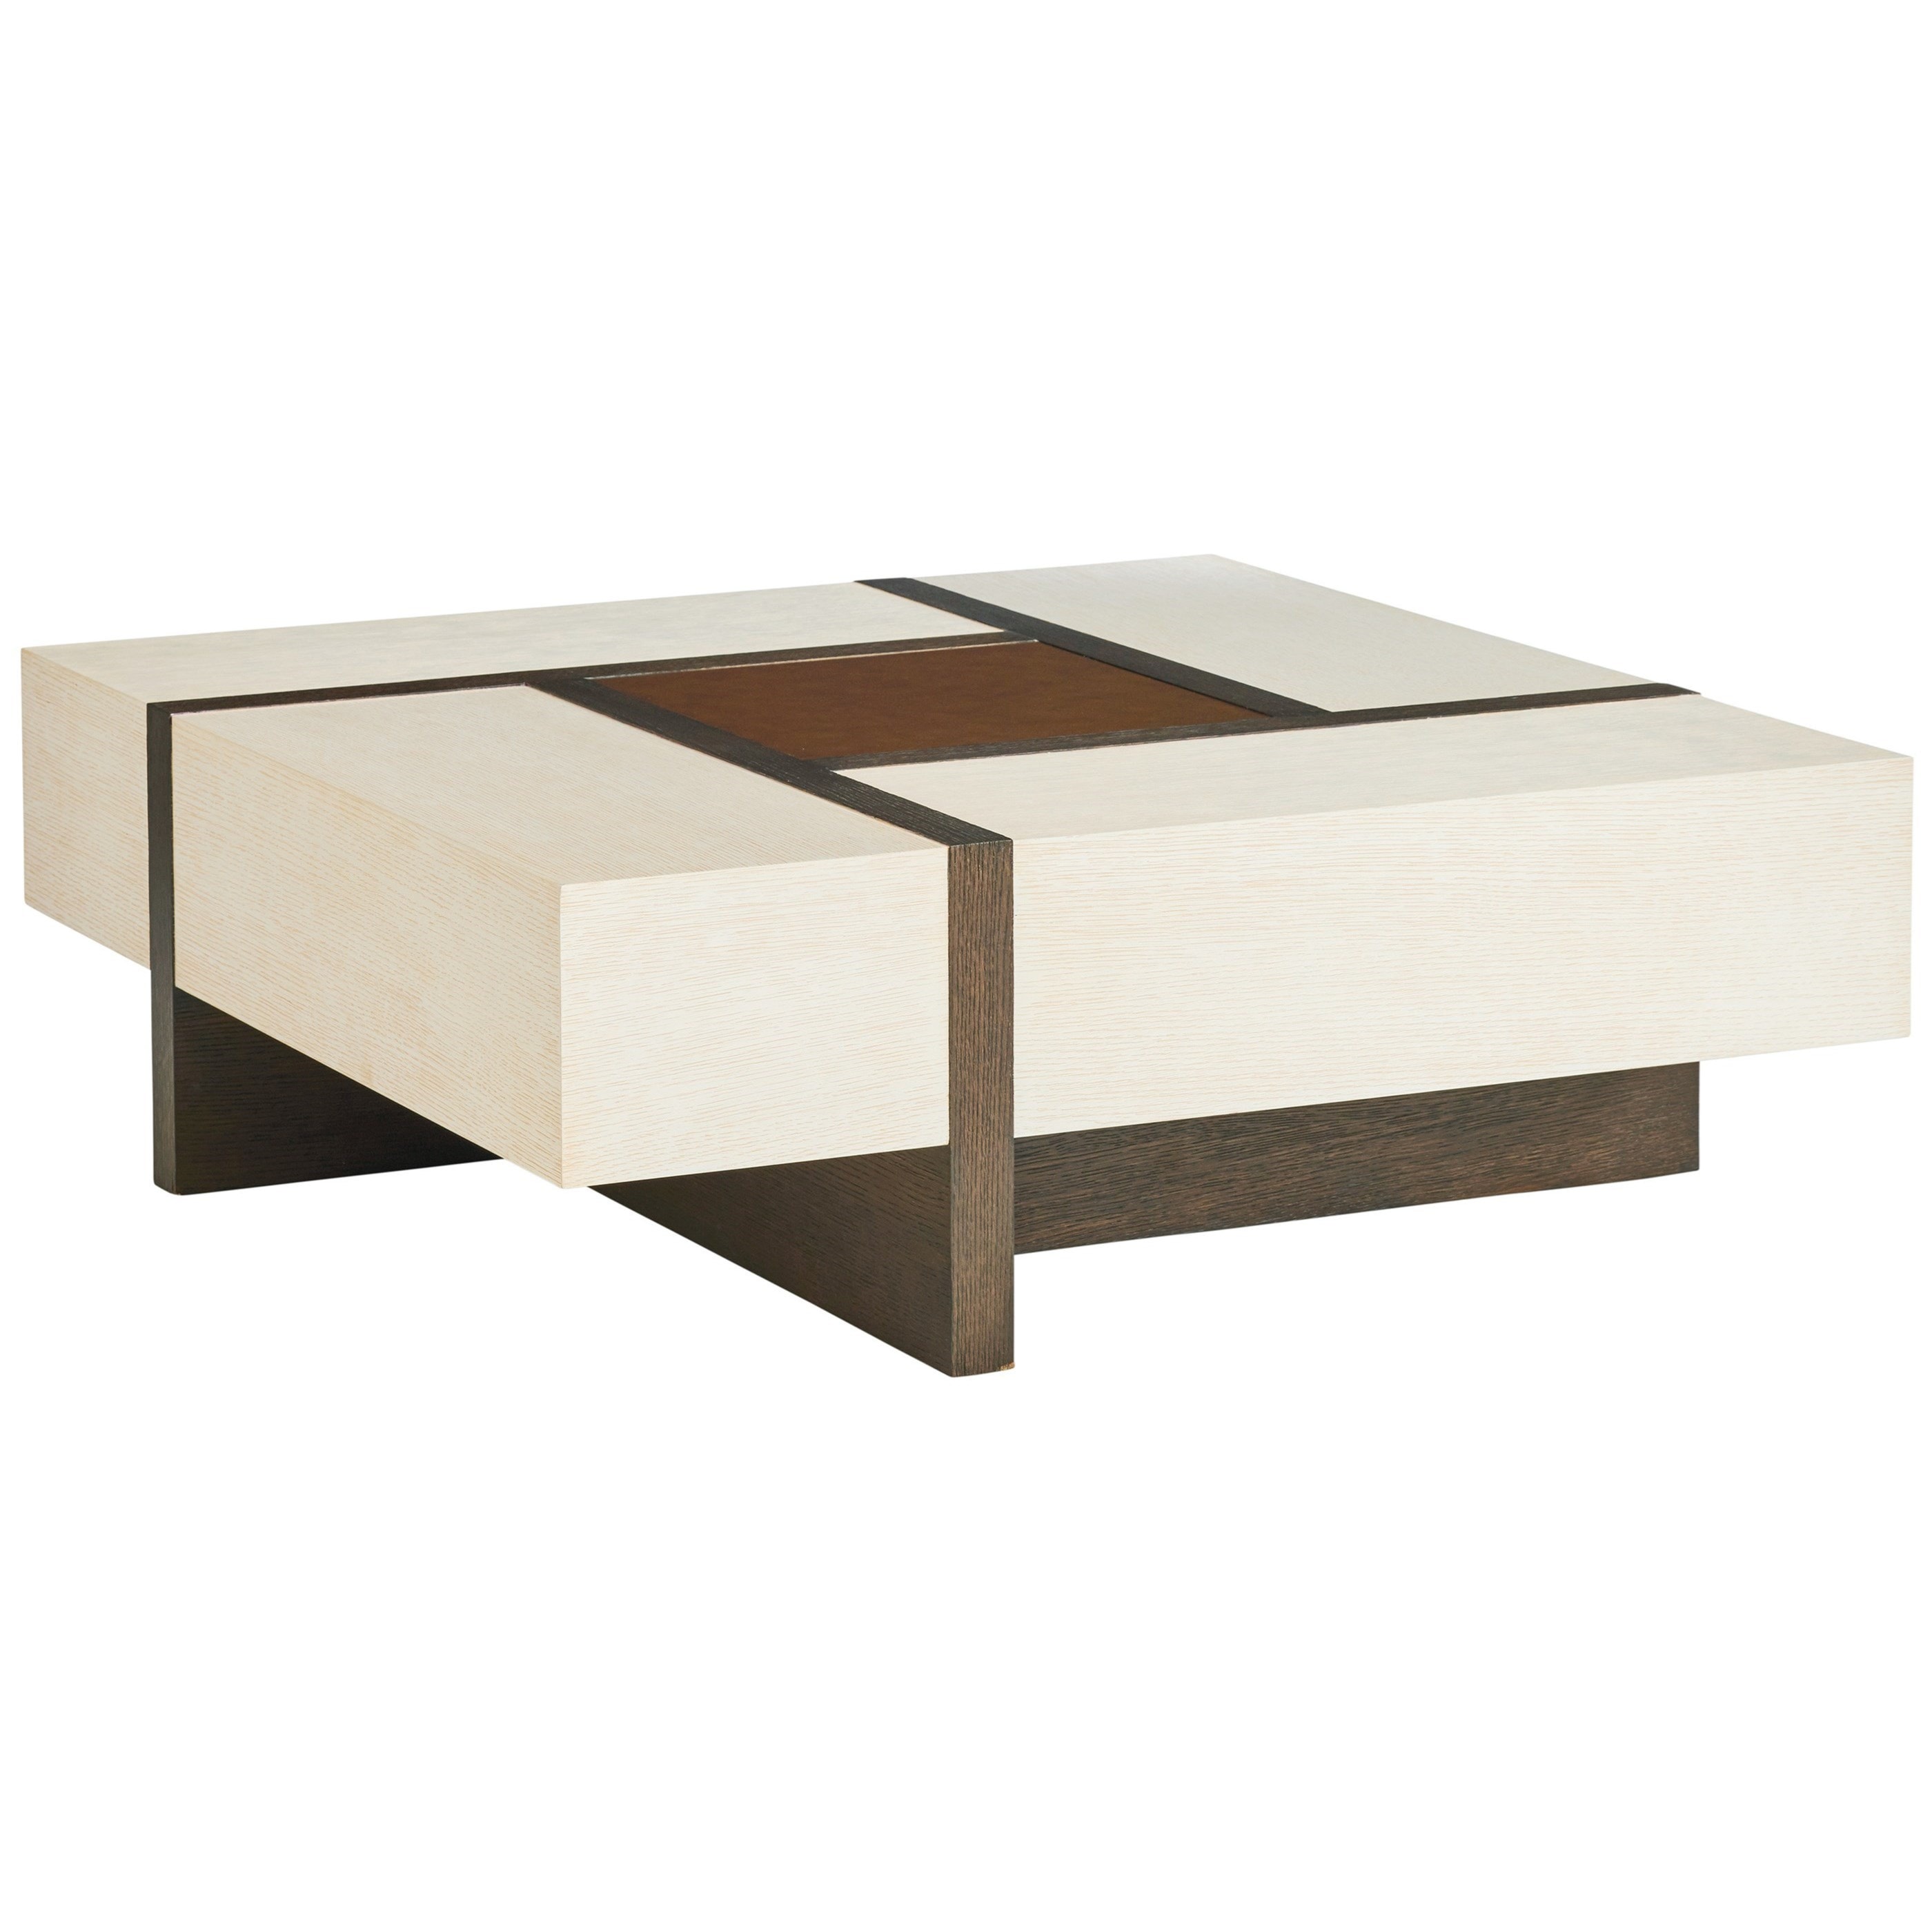 Barclay Butera Carmel 931-947 Links Square Cocktail Table Z  R Furniture  Cocktail/Coffee Tables